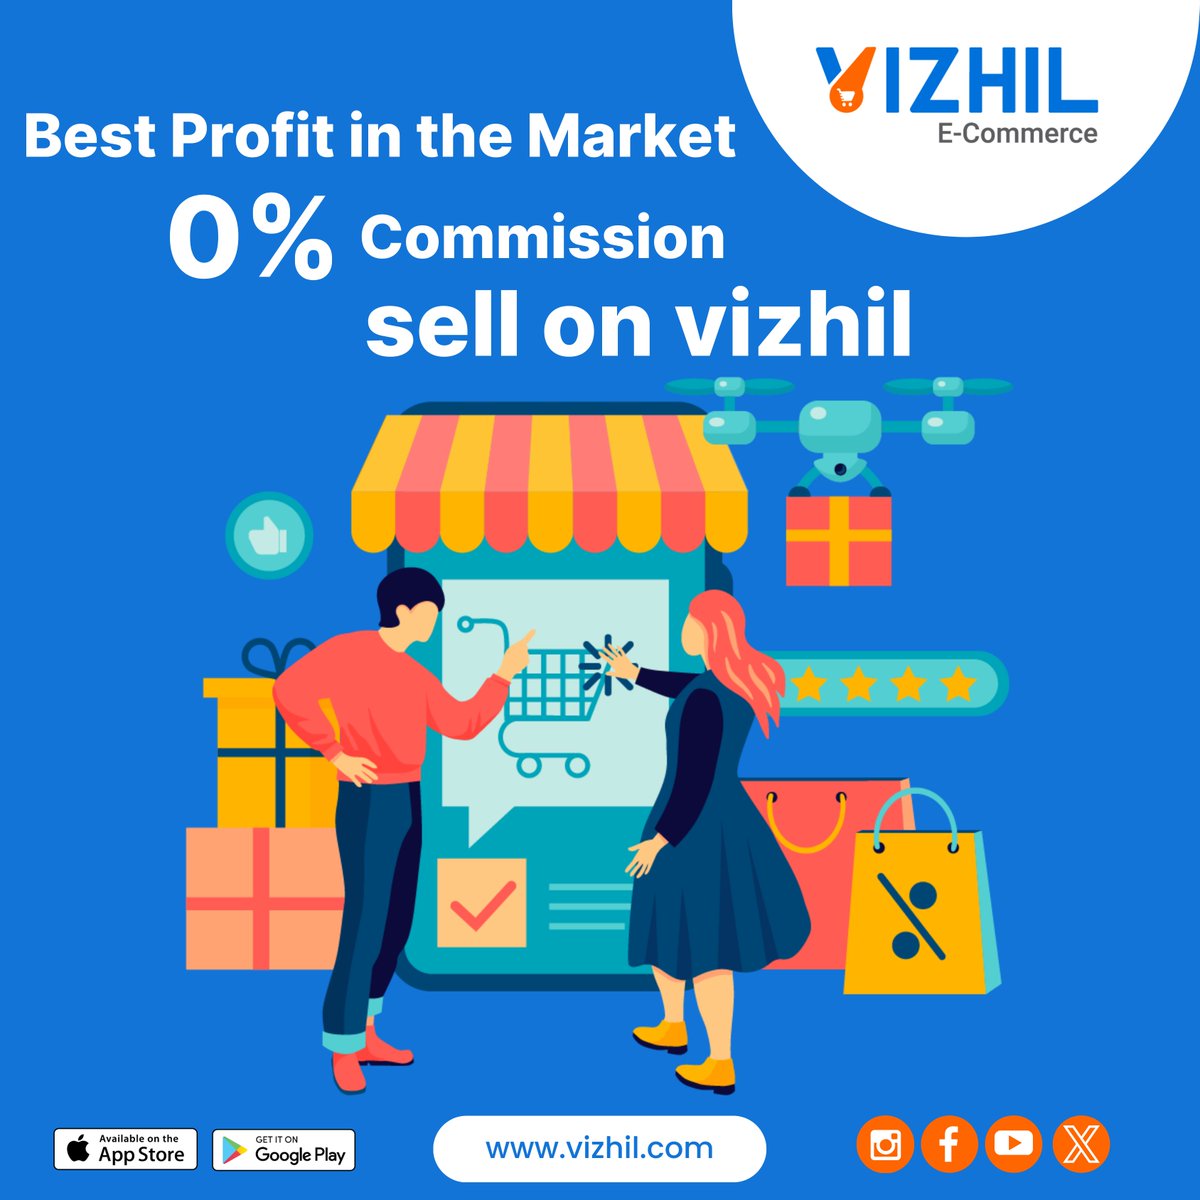 Sell on your terms, expand your market reach.

Follow us on: linktr.ee/vizhilofficial

#onlinesellers,#onlinebusiness,#ecommercesolutions,#OnlineSellersHub,#DigitalCommerce,#EcommerceGrowth,#OnlineMarketplace,#DigitalStorefront,#EcommercePlatform,#SellOnlineNow,